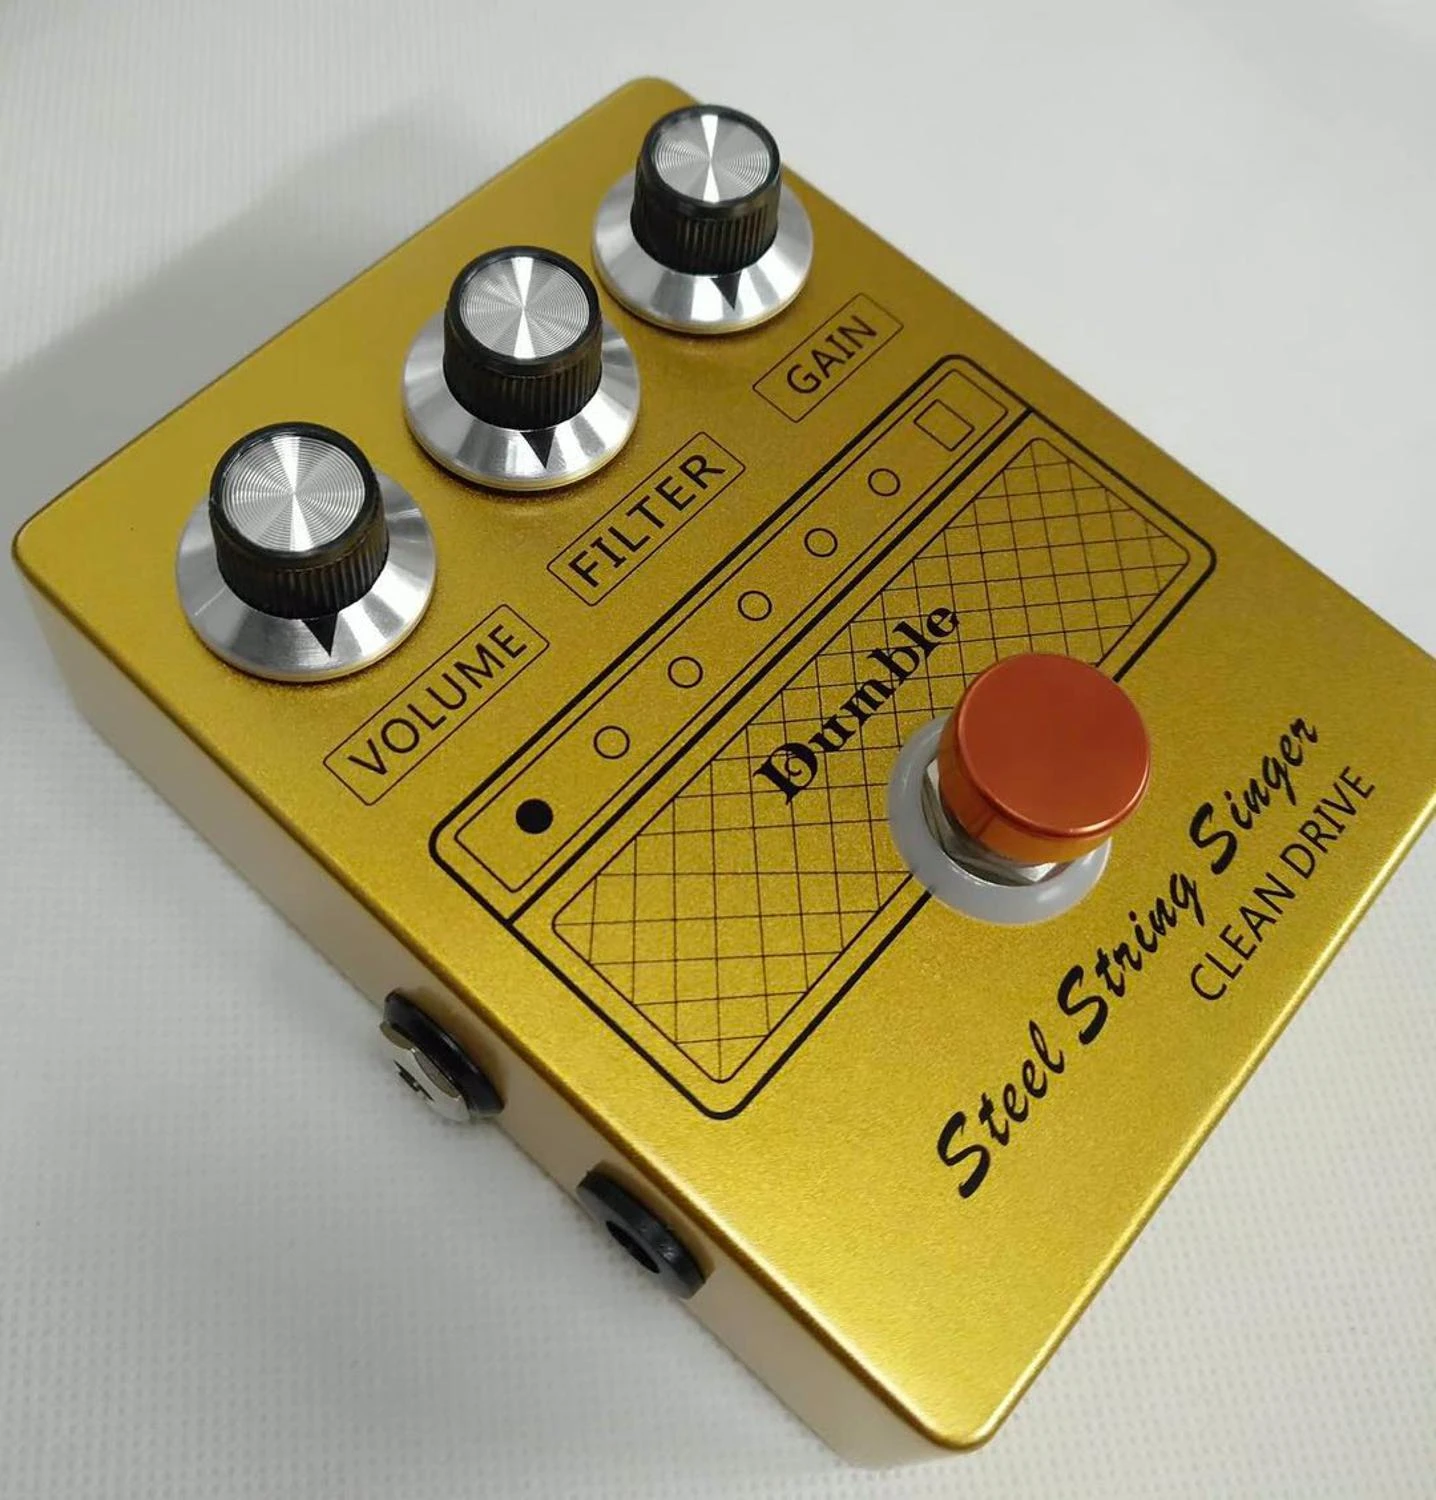 De stad Roei uit saai Grand Effect Pedal SSS Steel String Singer Clean Drive Guitar Pedal|Electric  Instrument Parts & Accessories| - AliExpress